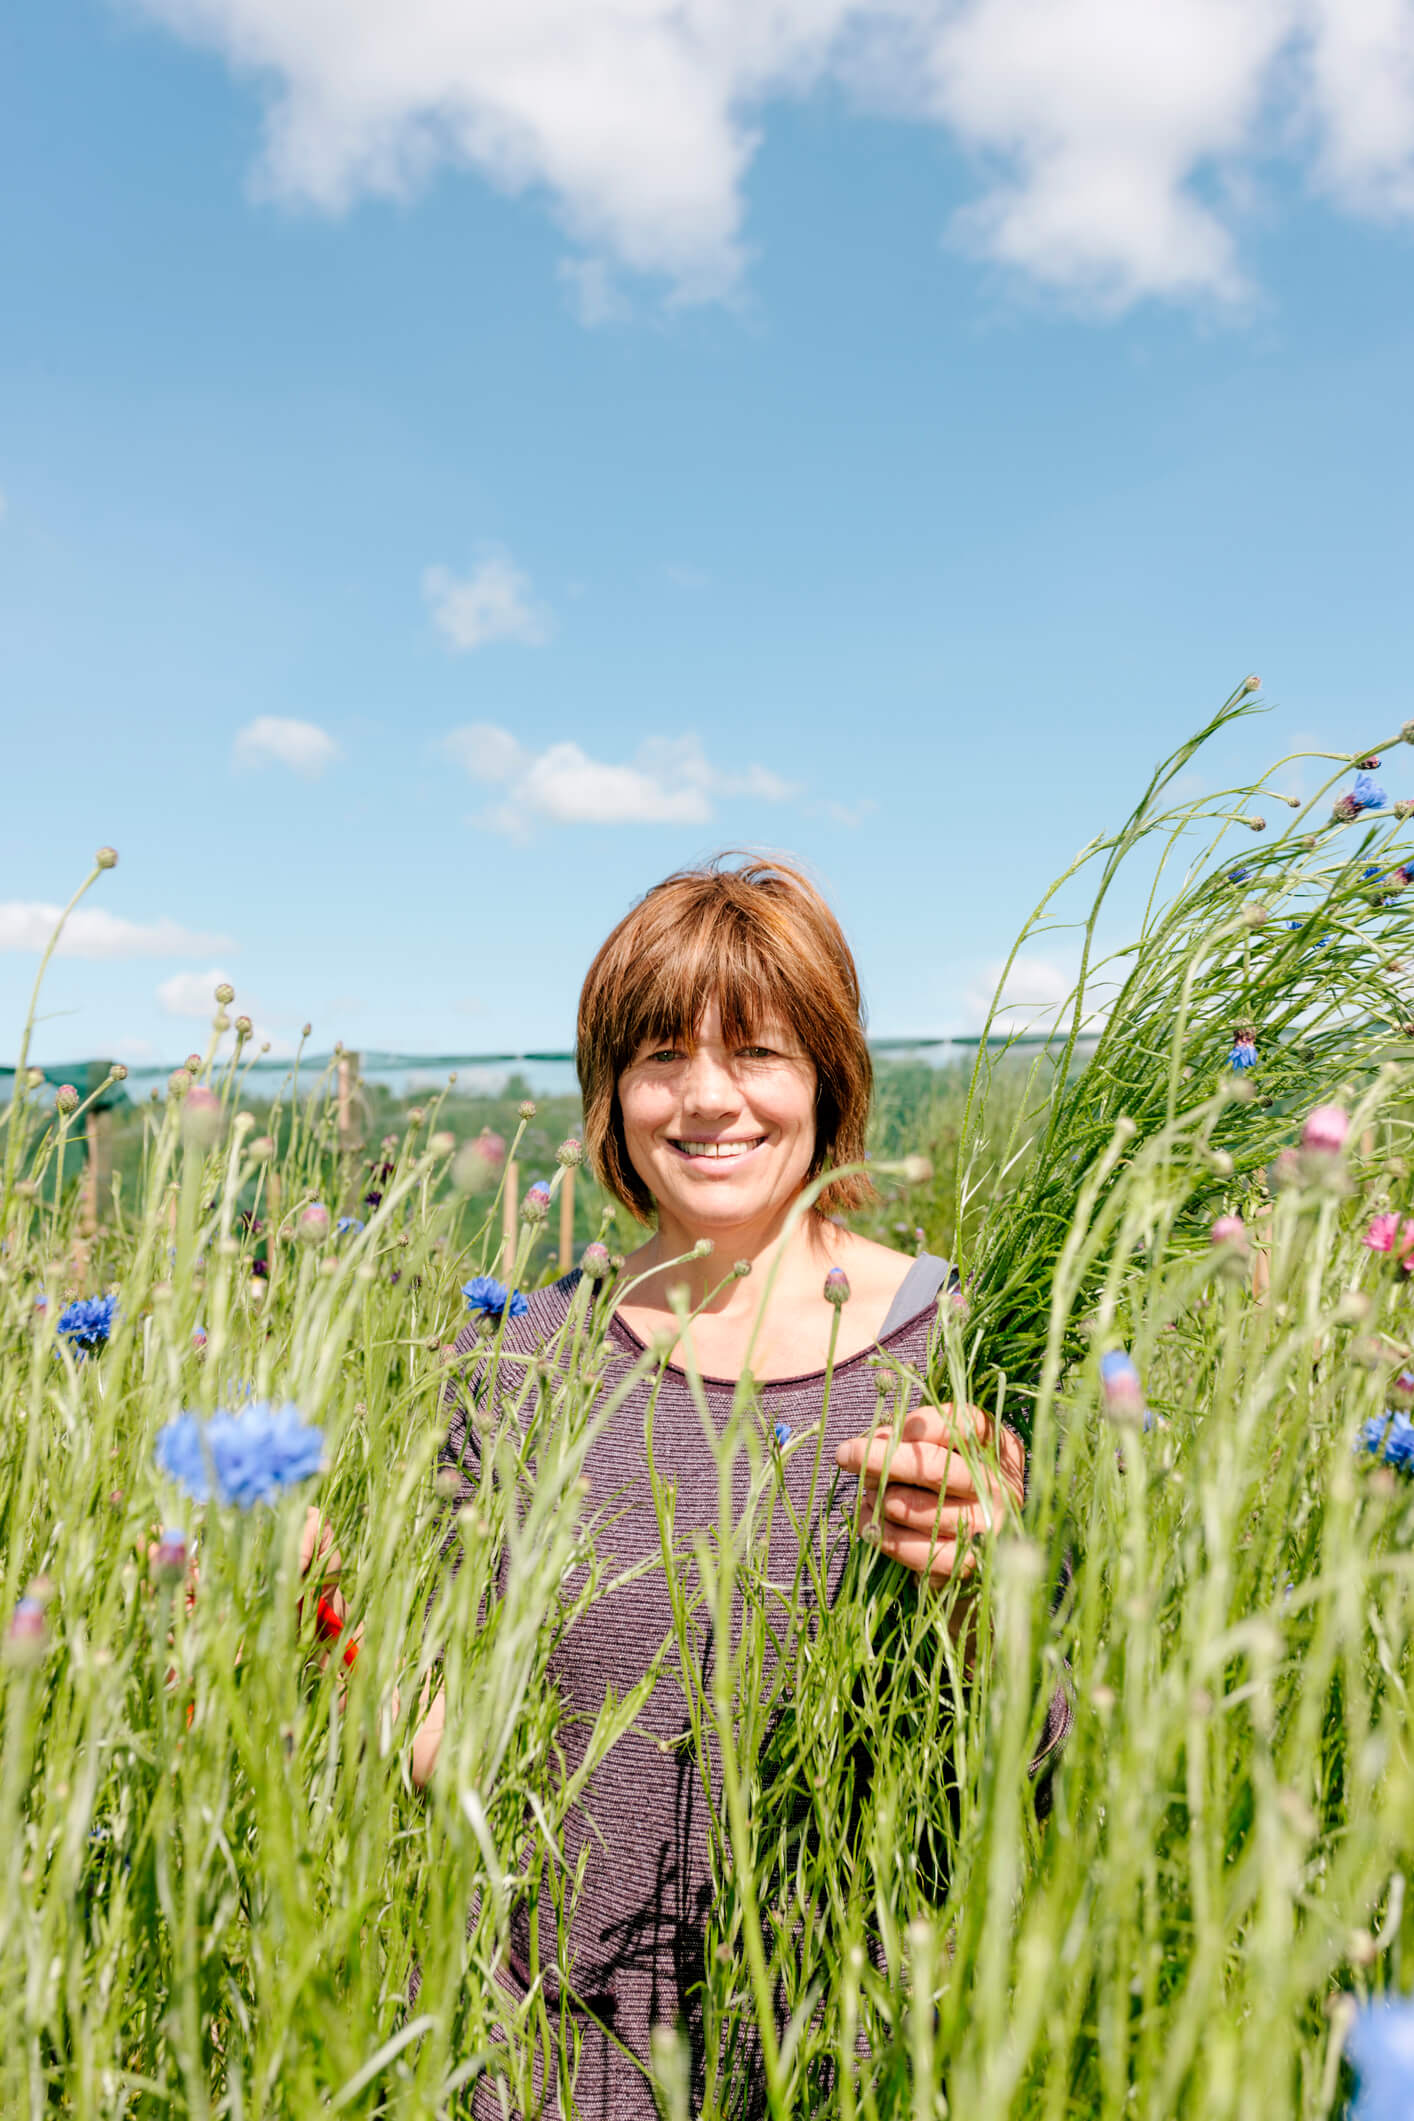 Lady standing in a field of tall grass